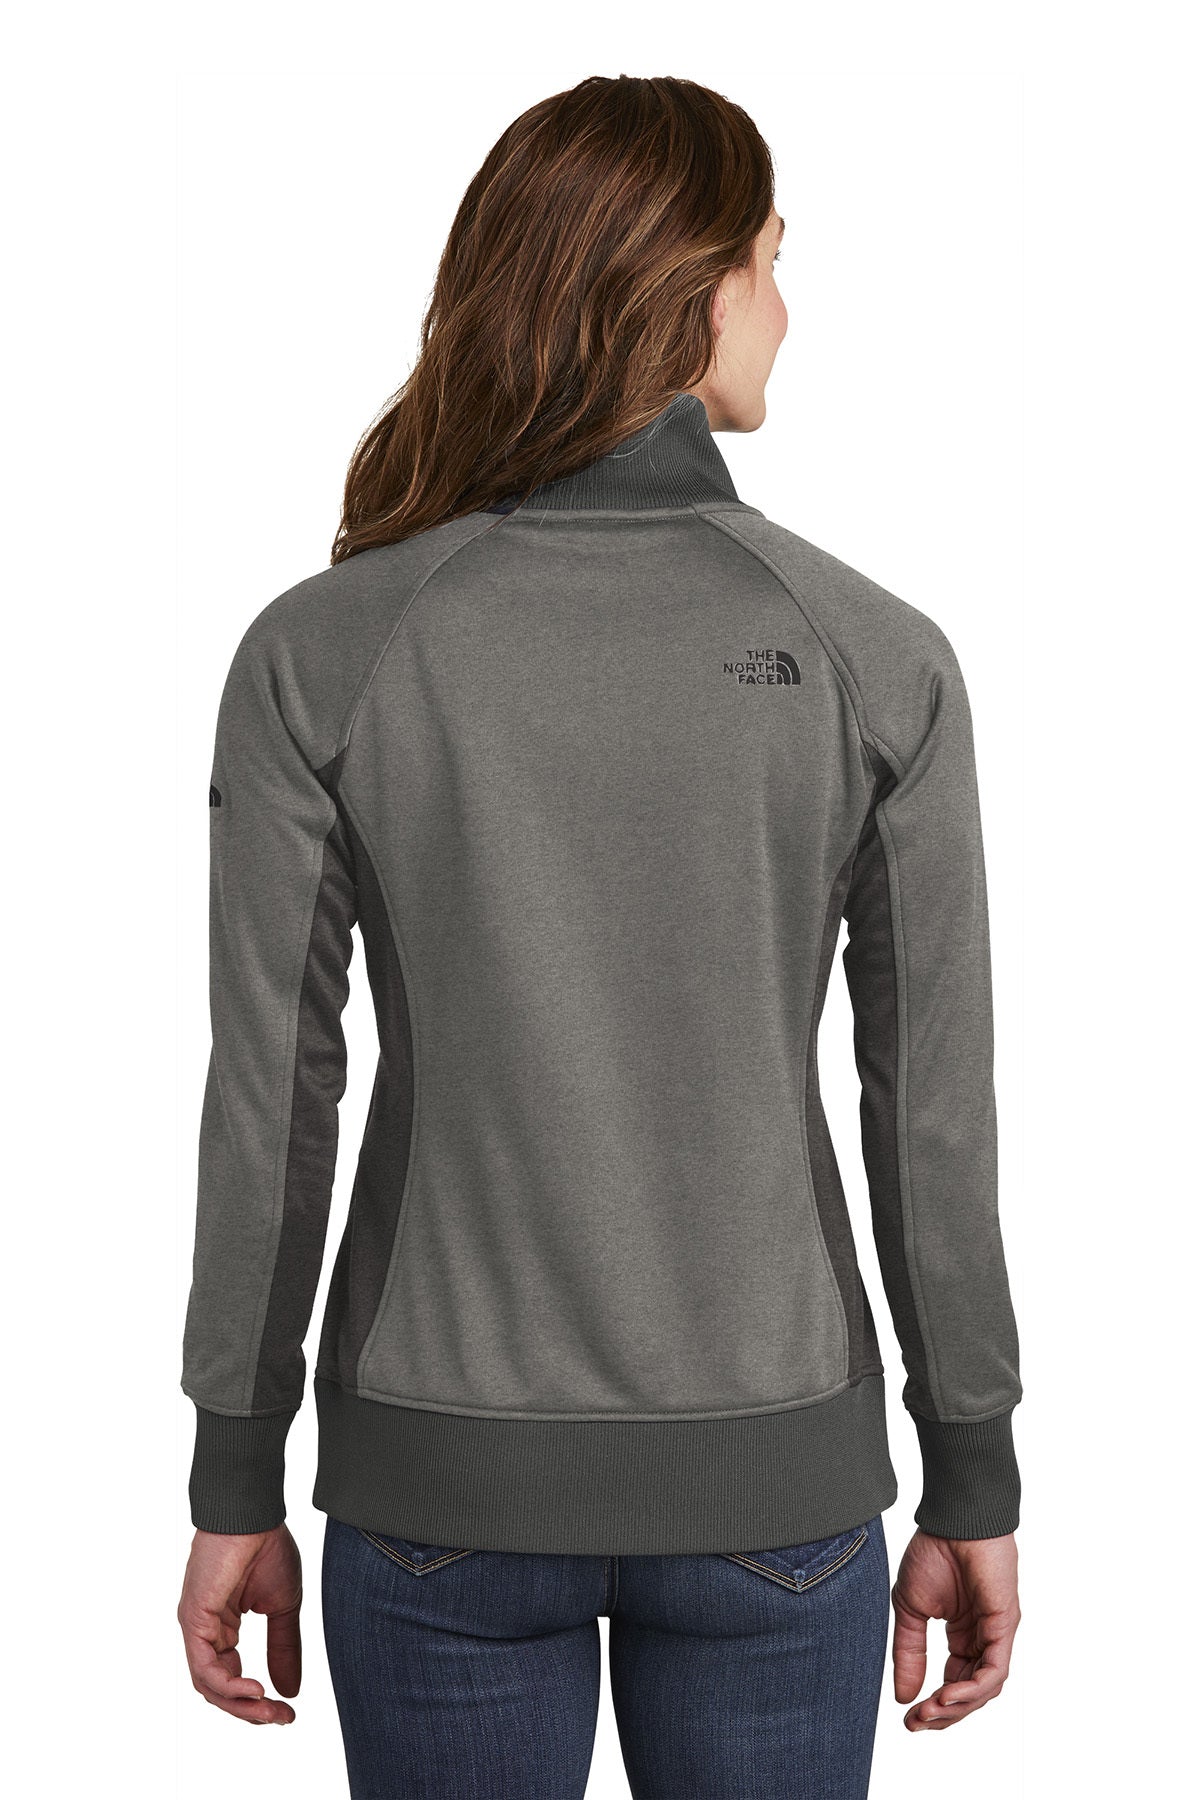 FiA The North Face Ladies Tech Full-Zip Fleece Jacket - Made to Order